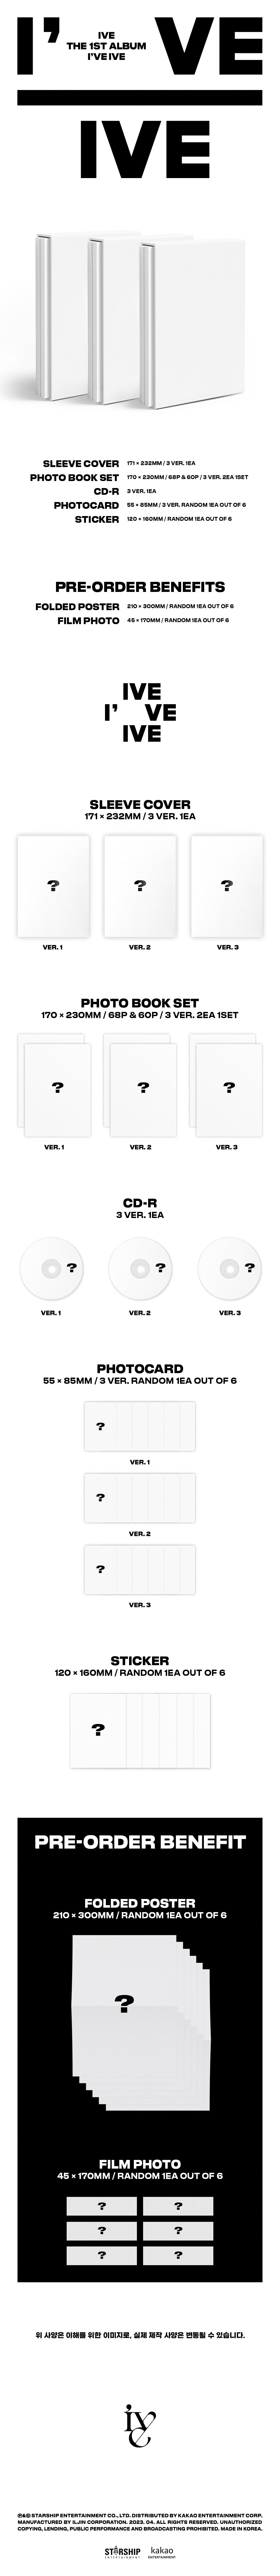 UK Free Tracked Shipping for IVE 1st Album [I've IVE] KITSCH with pre-order benefit POB photocard for sale. Buy from a huge collection of official merch at the best online kpop store marketplace in Manchester UK Europe. Buy BTS BT21 TWICE & TXT at our k-pop shop. Tomorrow X Together. Hanteo & Circle Korean charts.